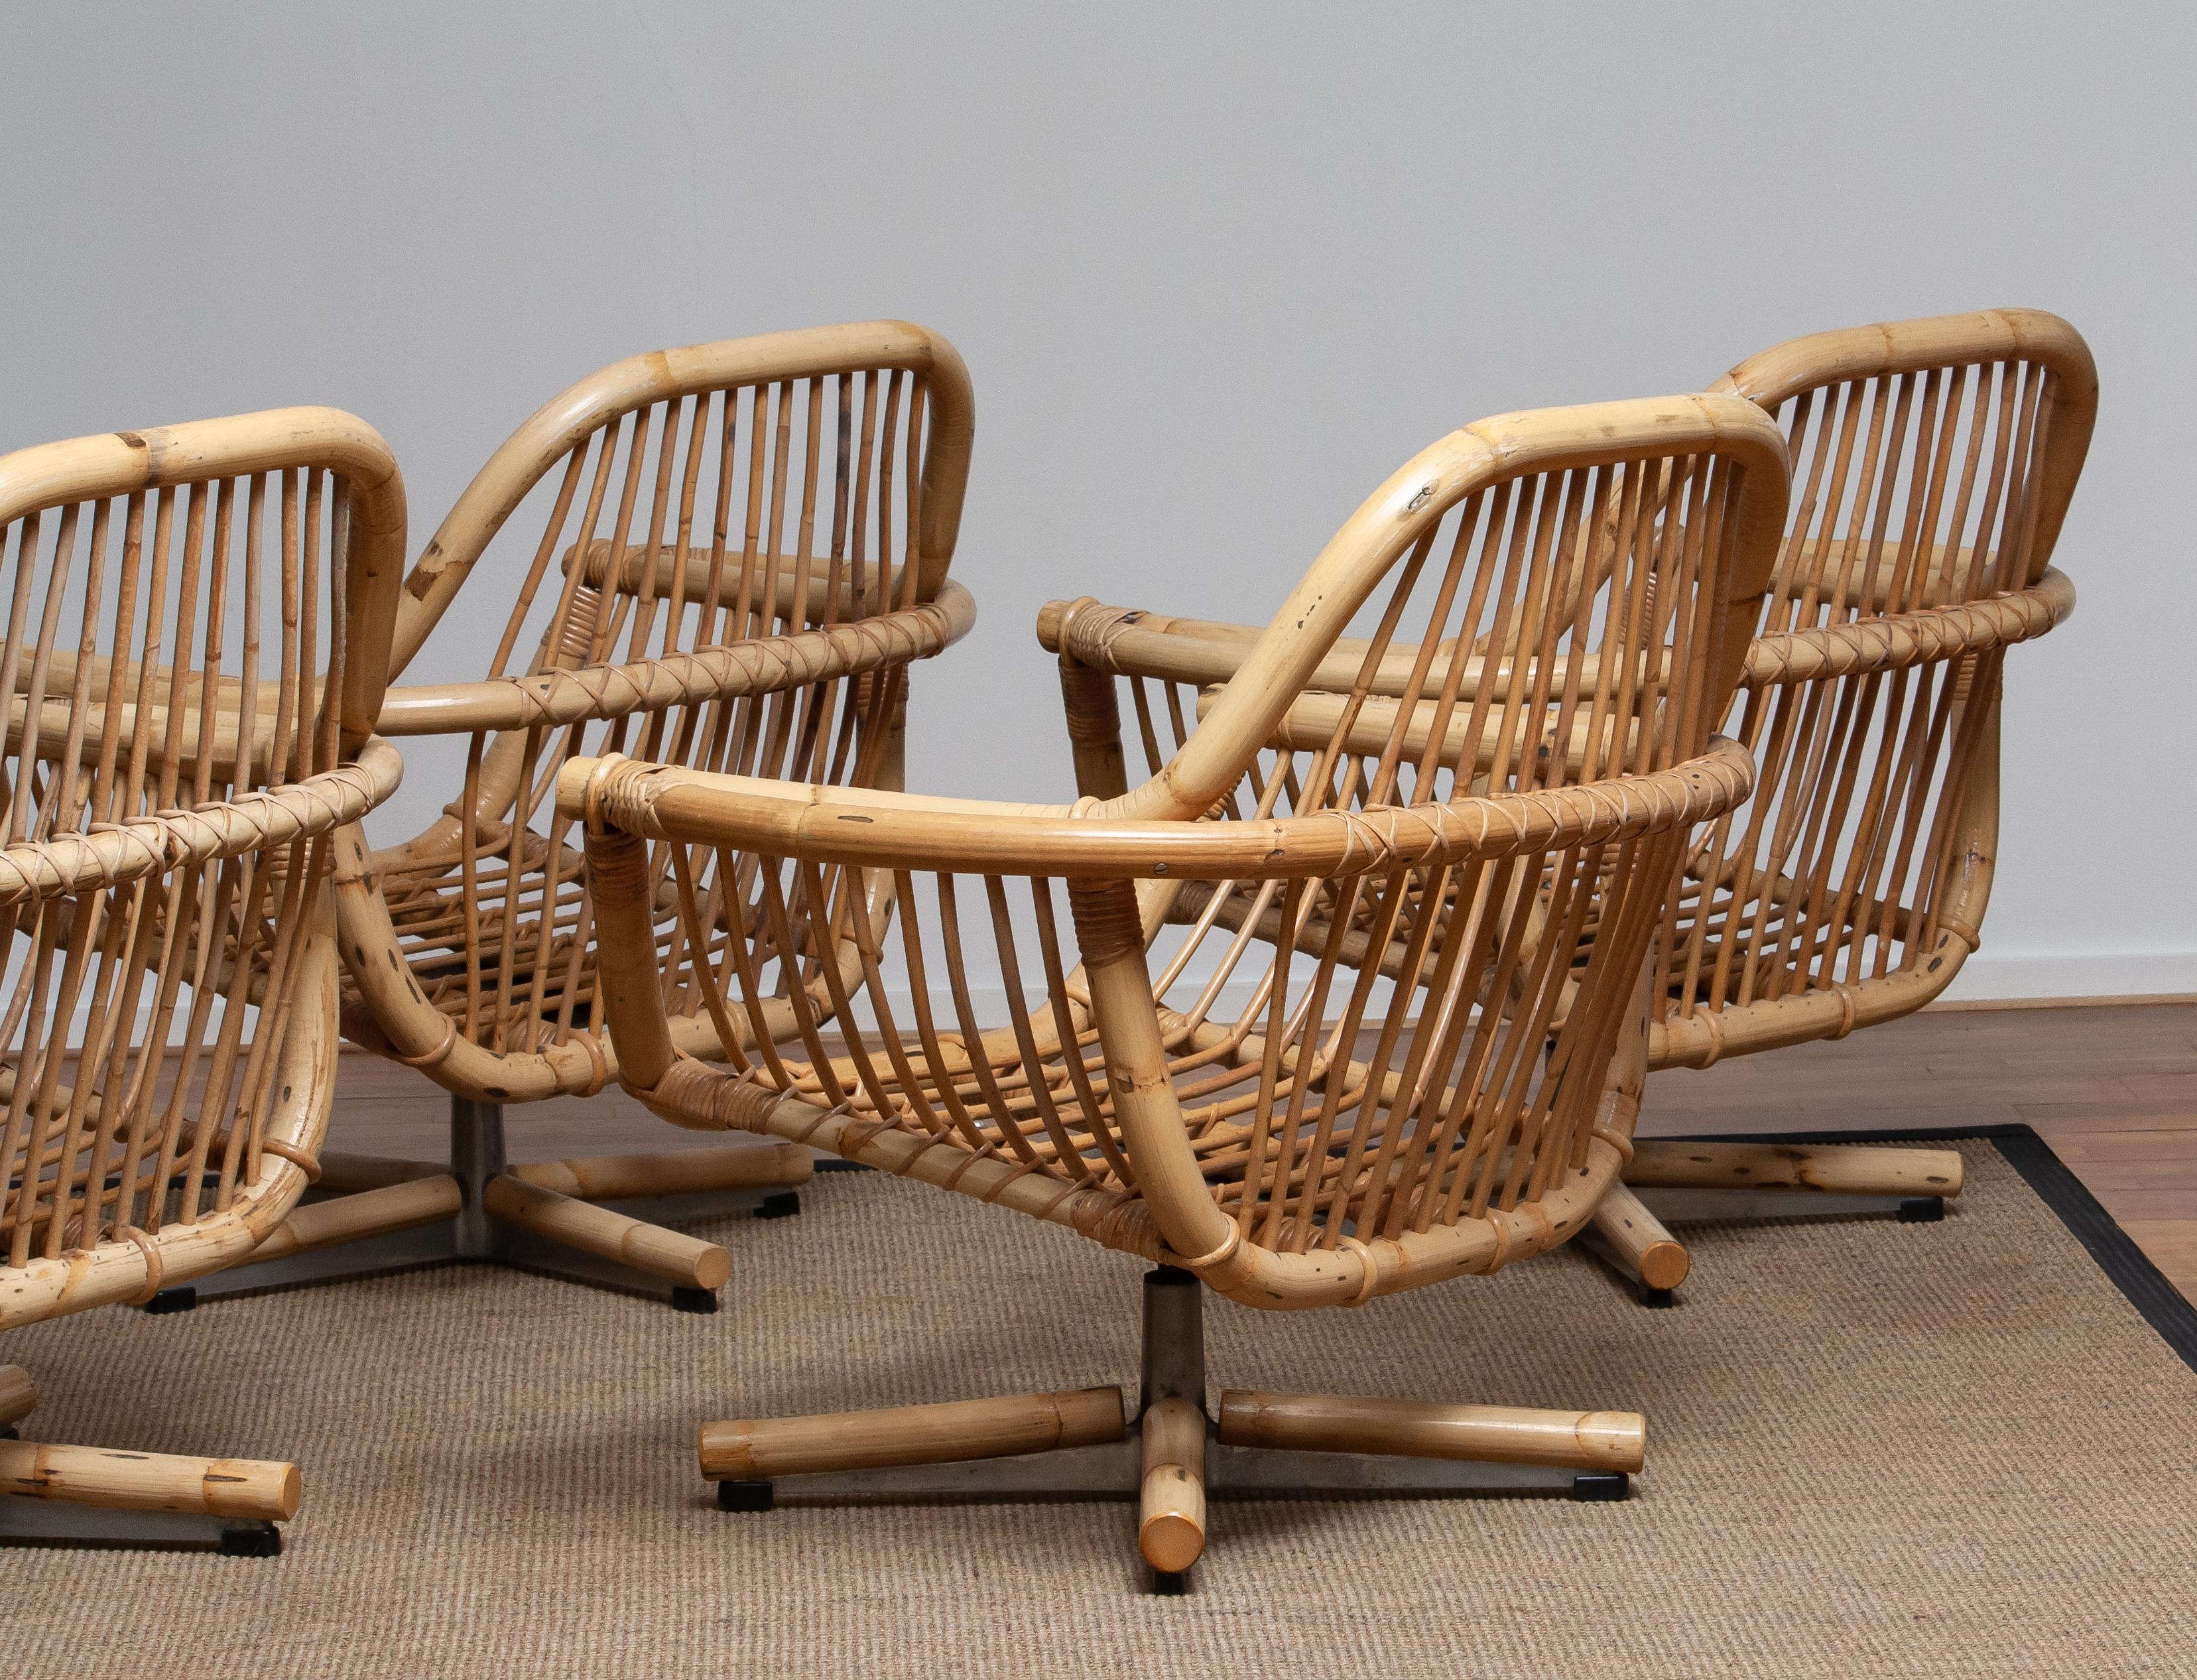 1960s Rattan Garden Set / Lounge Set Consist Five Swivel Chairs and Coffee Table 7